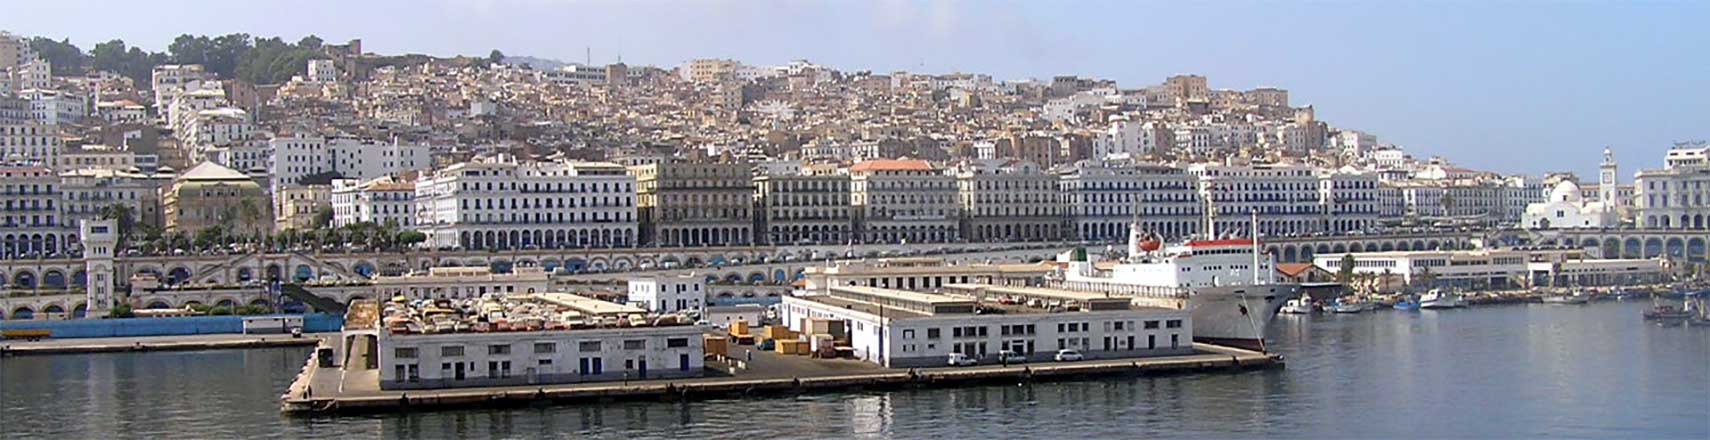 Central Algiers waterfront